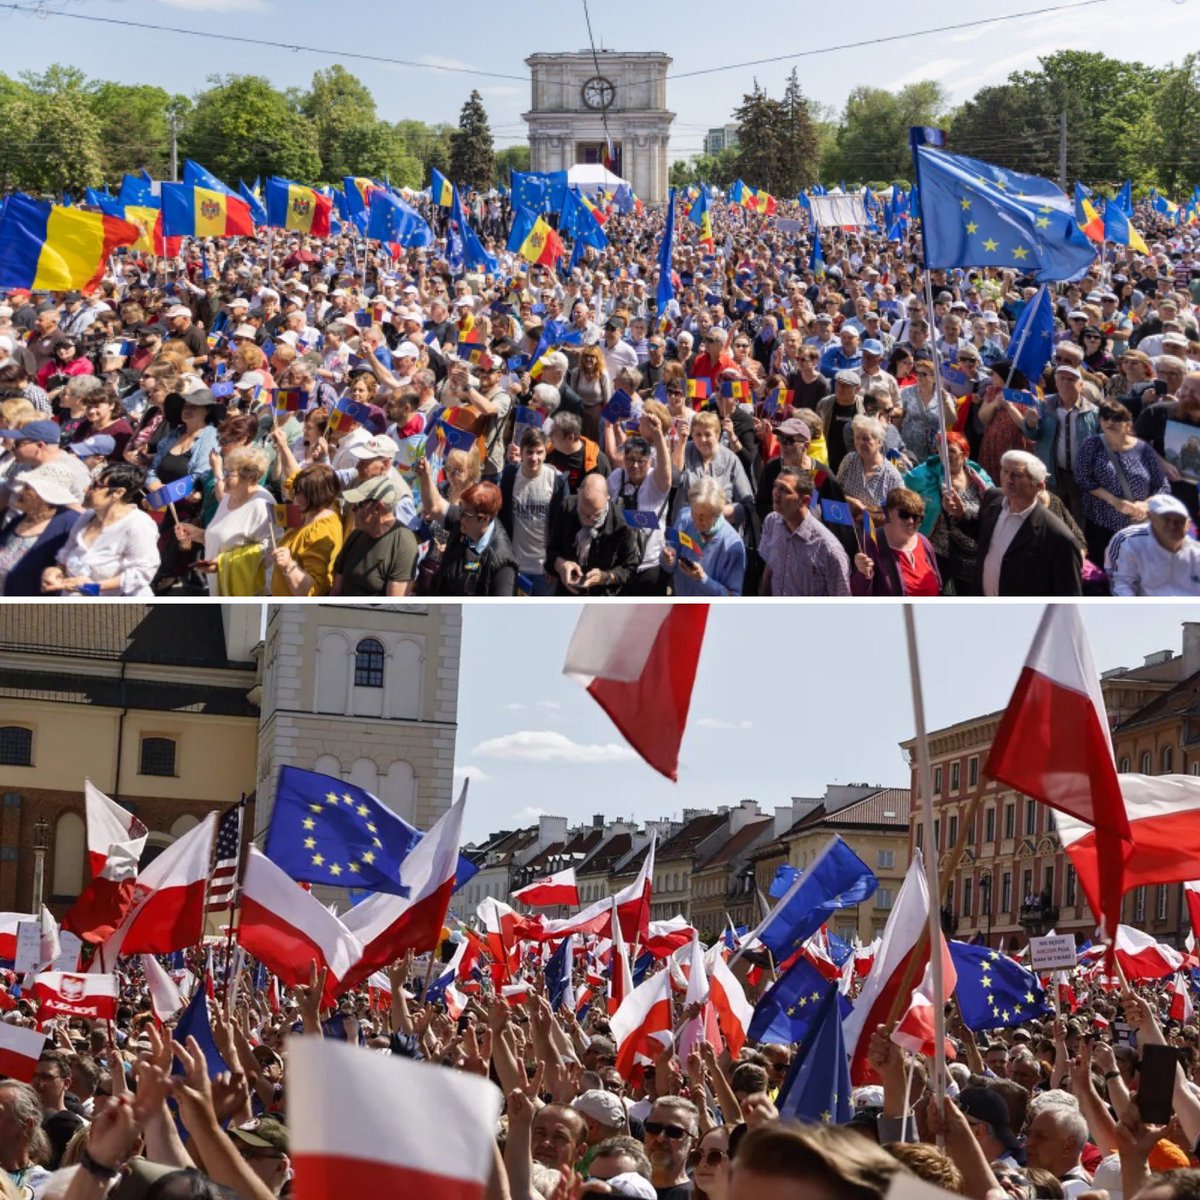 Moldova, 2 weeks ago. Poland, this week.

People are ready to come out for #Europe and for the values of the free world.

 #europeanvalues #EUvalues #moldova #poland #Marsz4czerwca 

Photo sources: președinte.md / Politico.eu